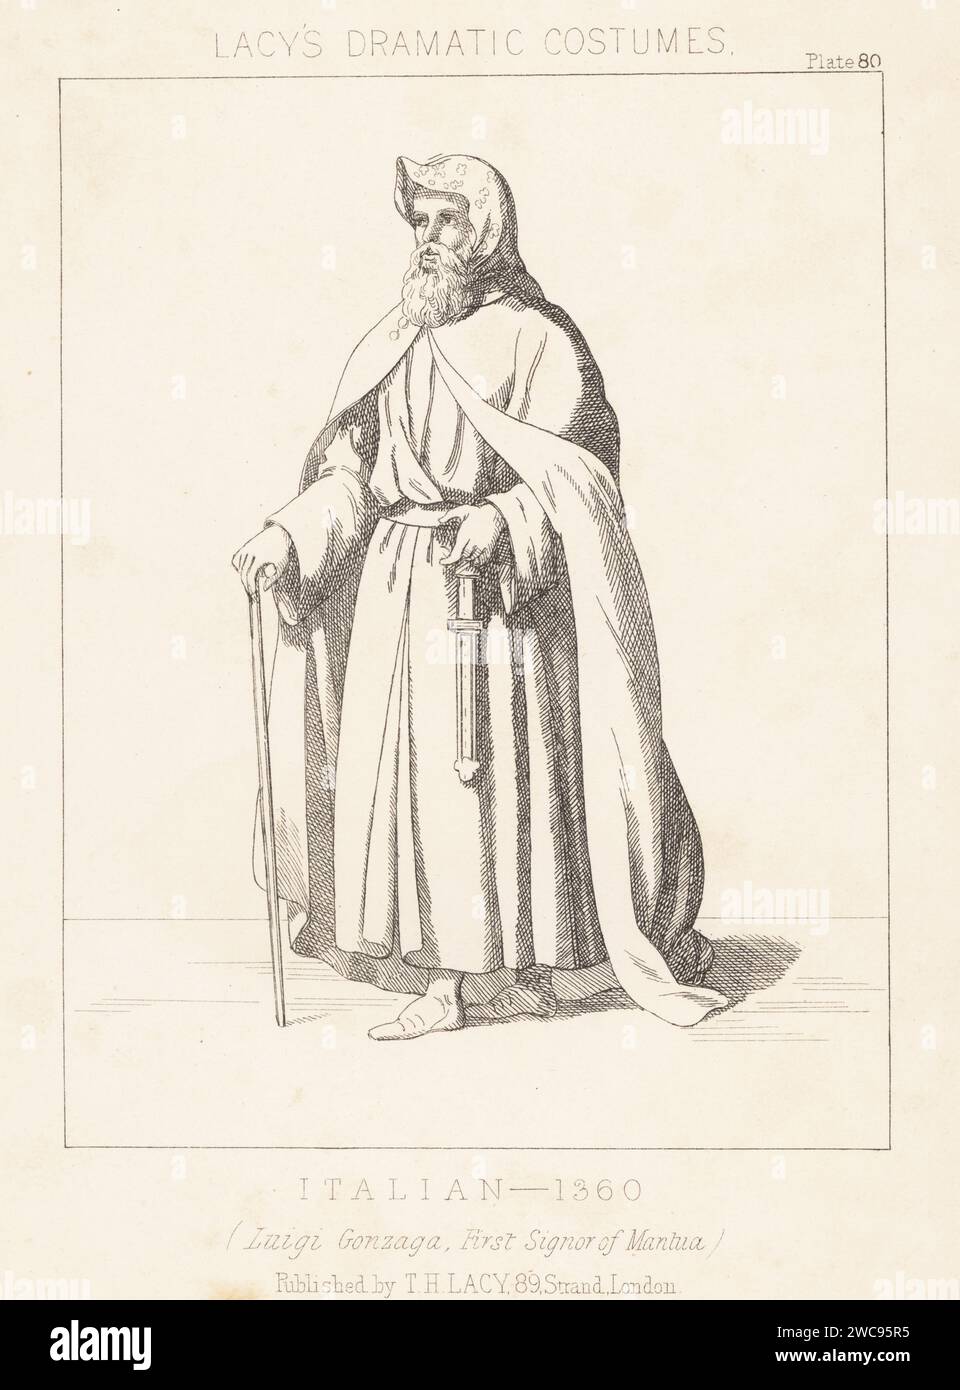 Ludovico I Gonzaga, Italian lord, founder of the Gonzaga family, first capitano del popolo of Mantua and imperial vicar, 1268-1360. In hood, cloak, habit, long belt, with staff. Luigi Gonzaga, First Signor of Mantua, Italy. Lithograph from Thomas Hailes Lacy's Male Costumes, Historical, National and Dramatic in 200 Plates, London, 1865. Lacy (1809-1873) was a British actor, playwright, theatrical manager and publisher. Stock Photo